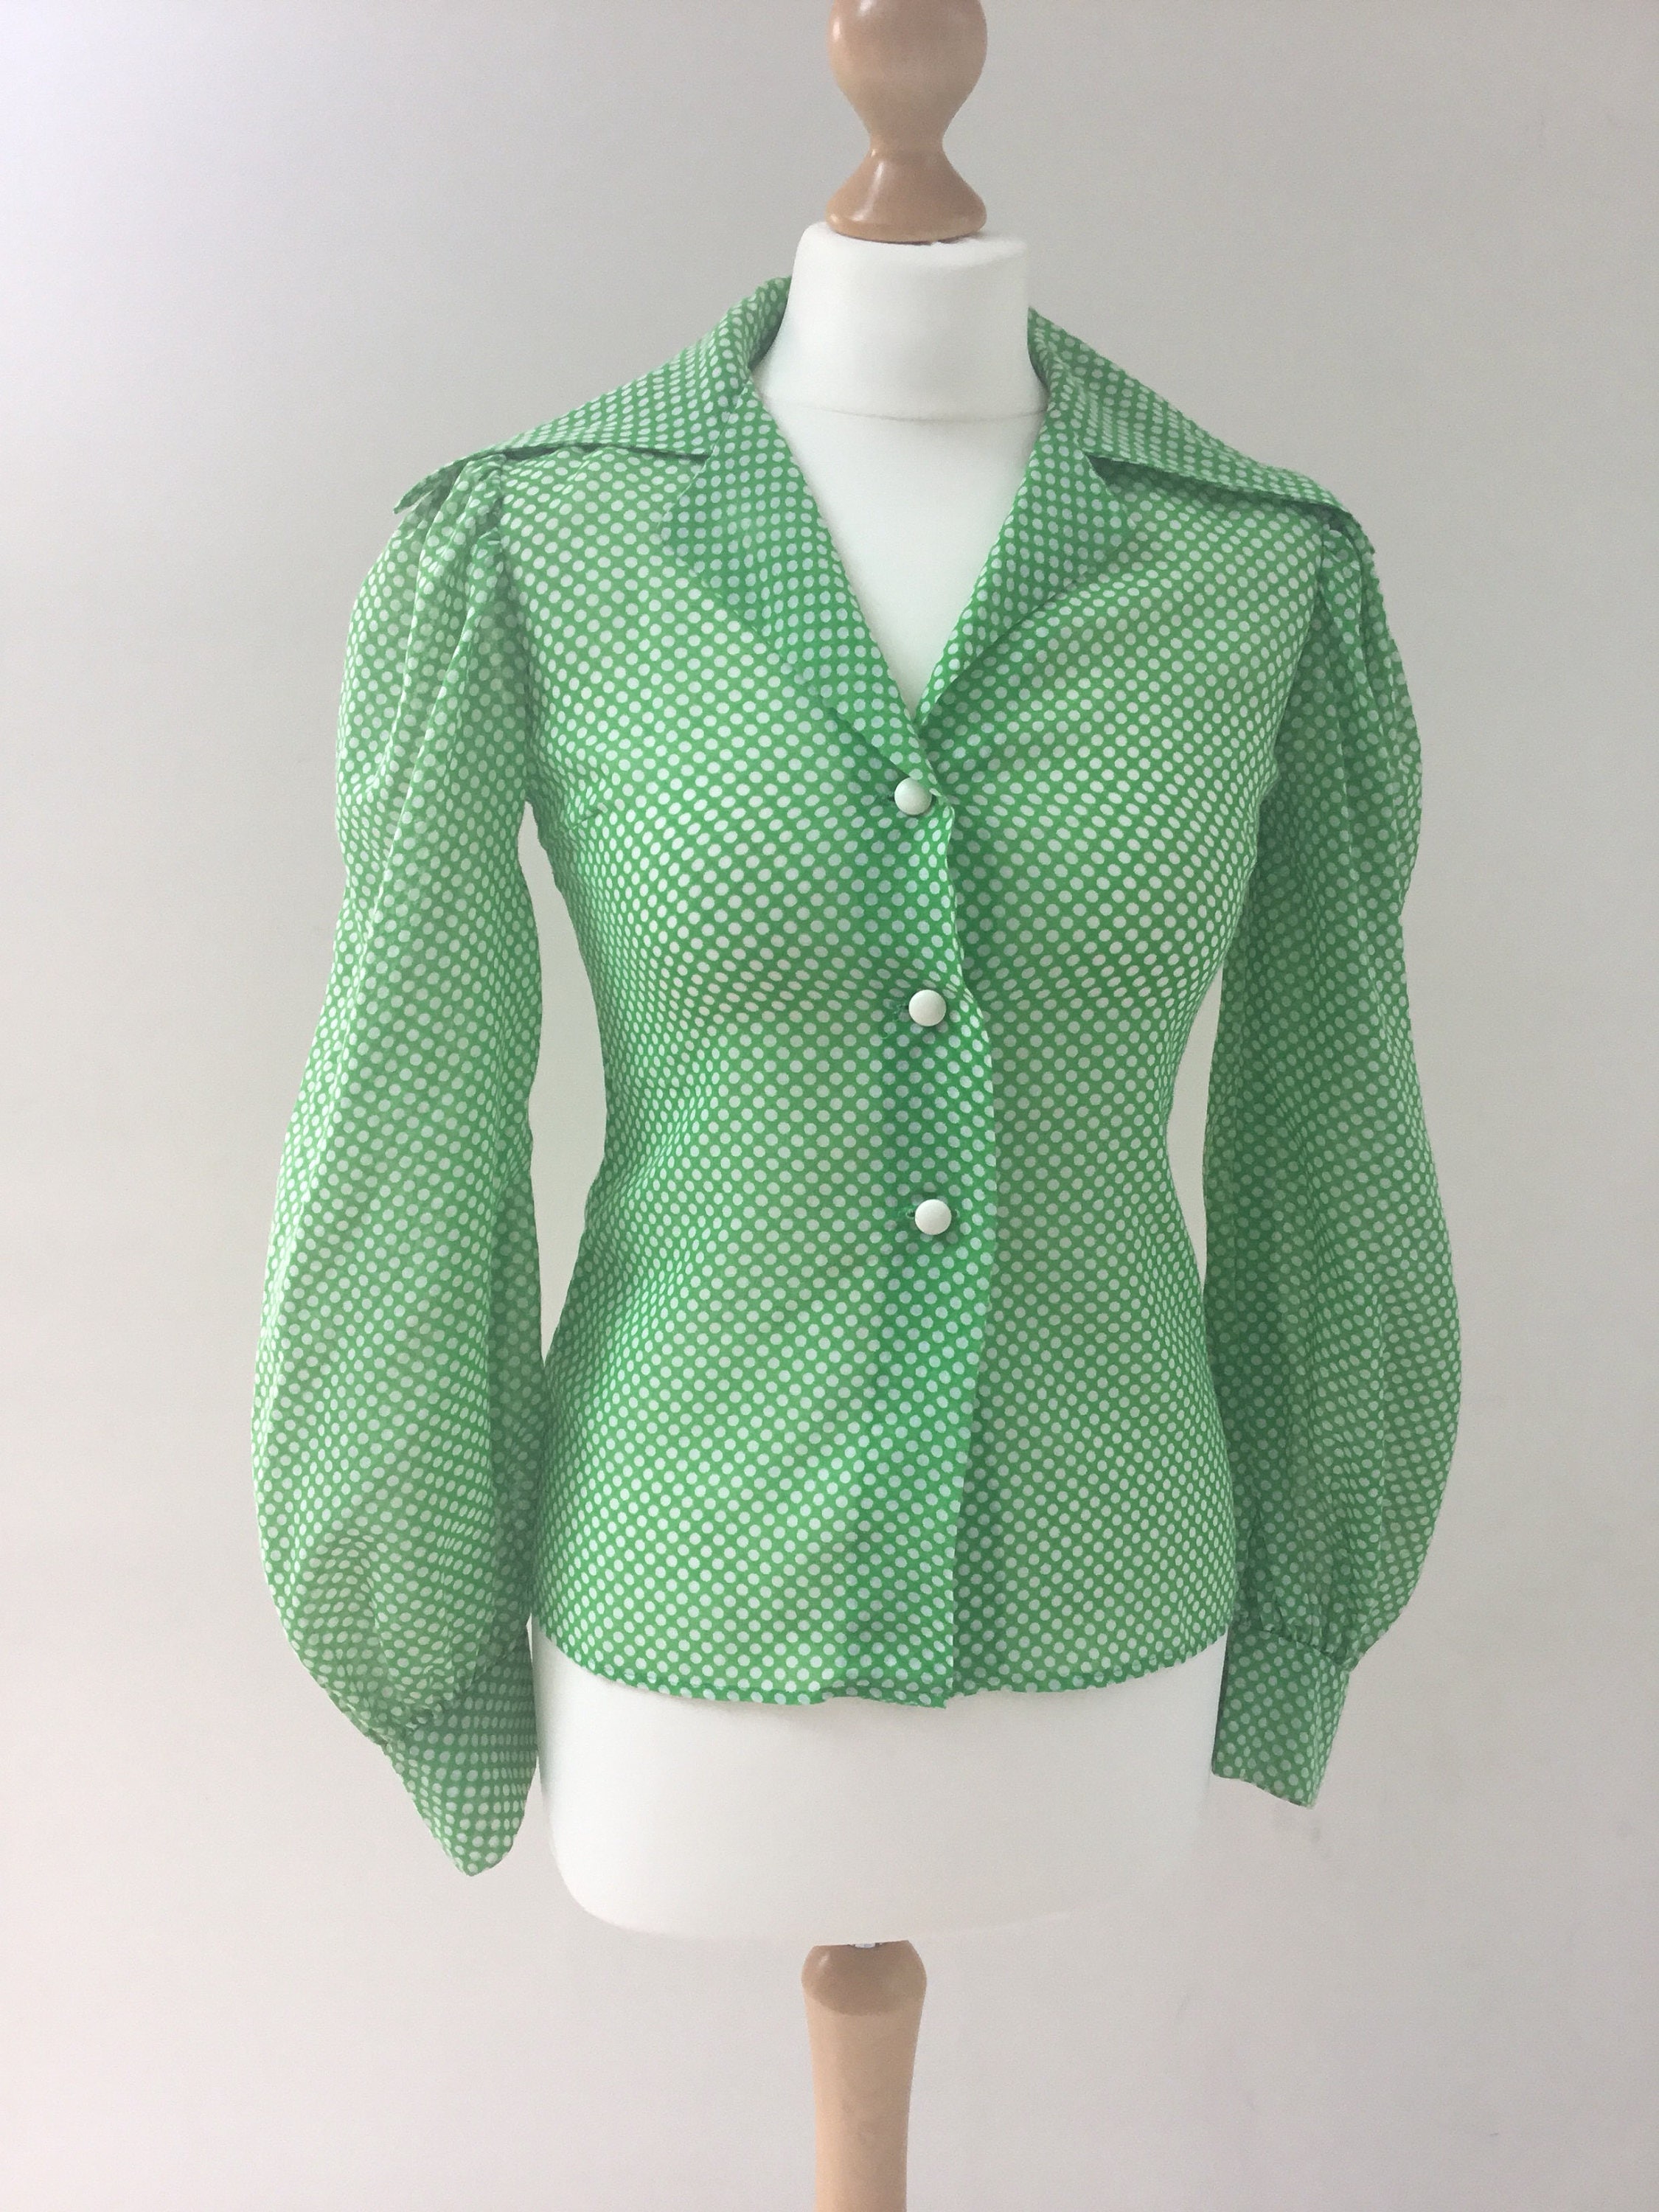 Polly peck by Sybil Zelker laidies shirt, size 8 1970s blouse with ...